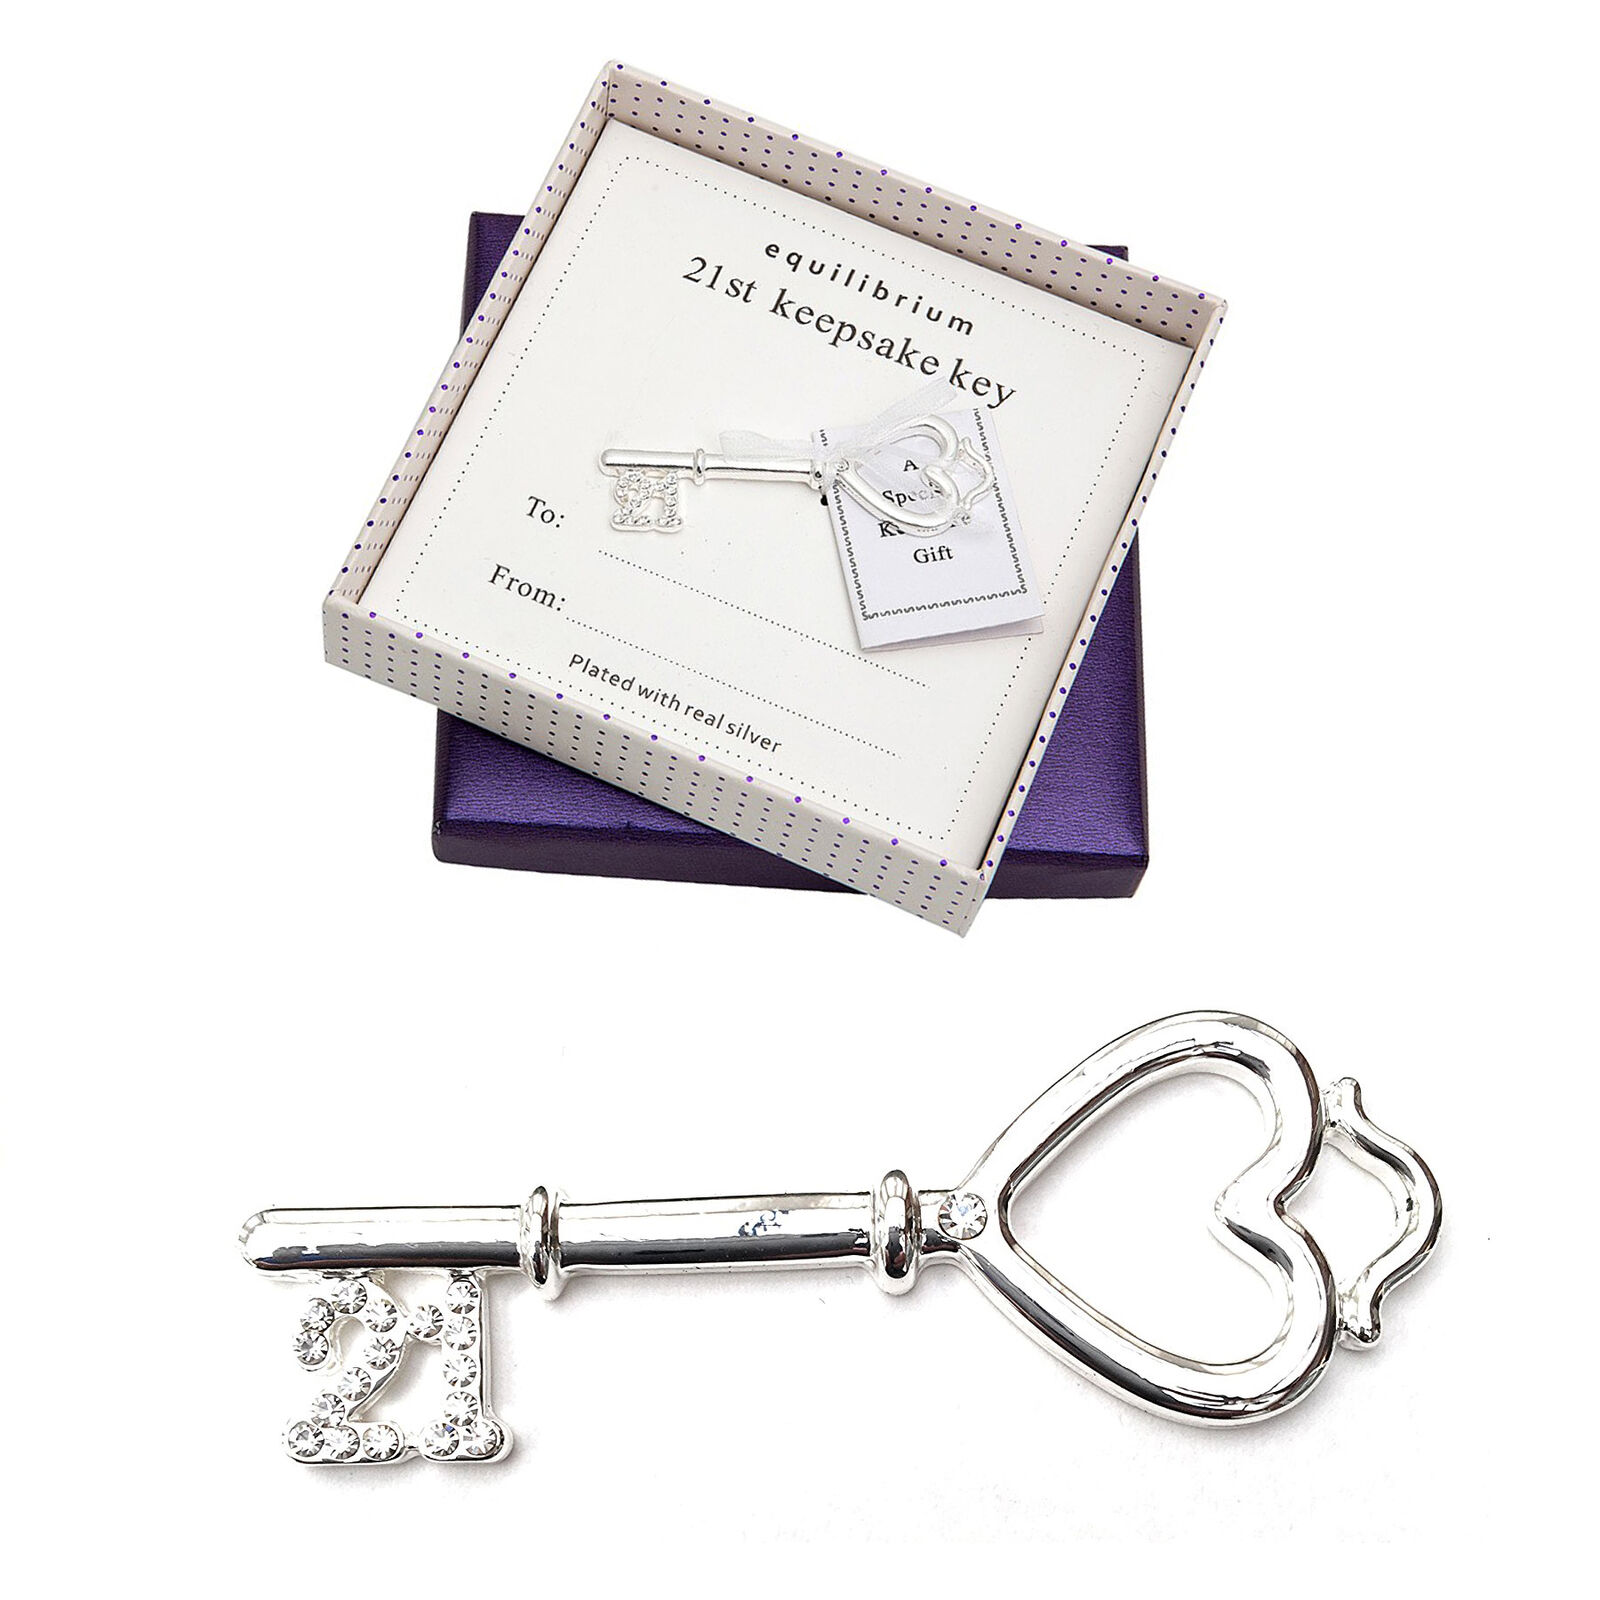 Equilibrium Silver Plated Special Birthday Keepsake Key - 21st